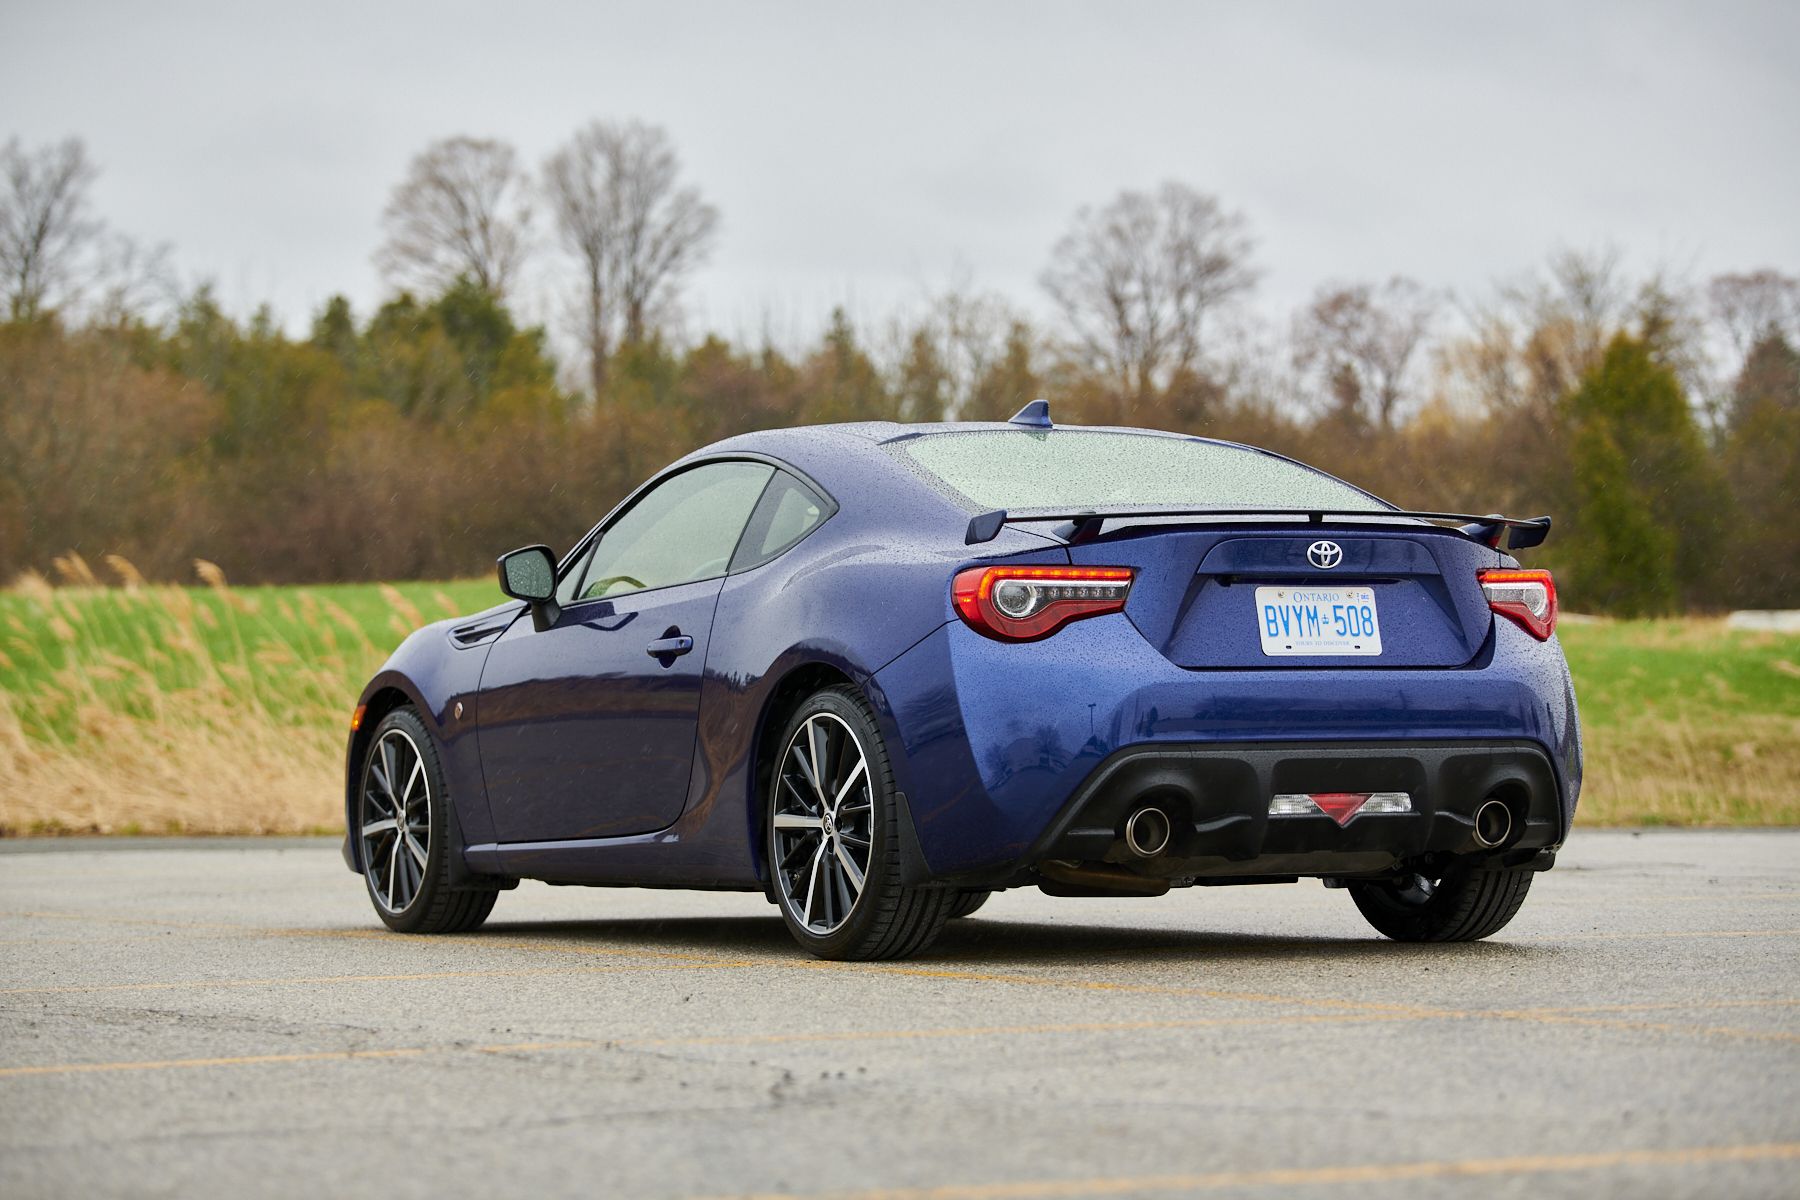 Toyota GT86 (2013 - 2016) used car review, Car review